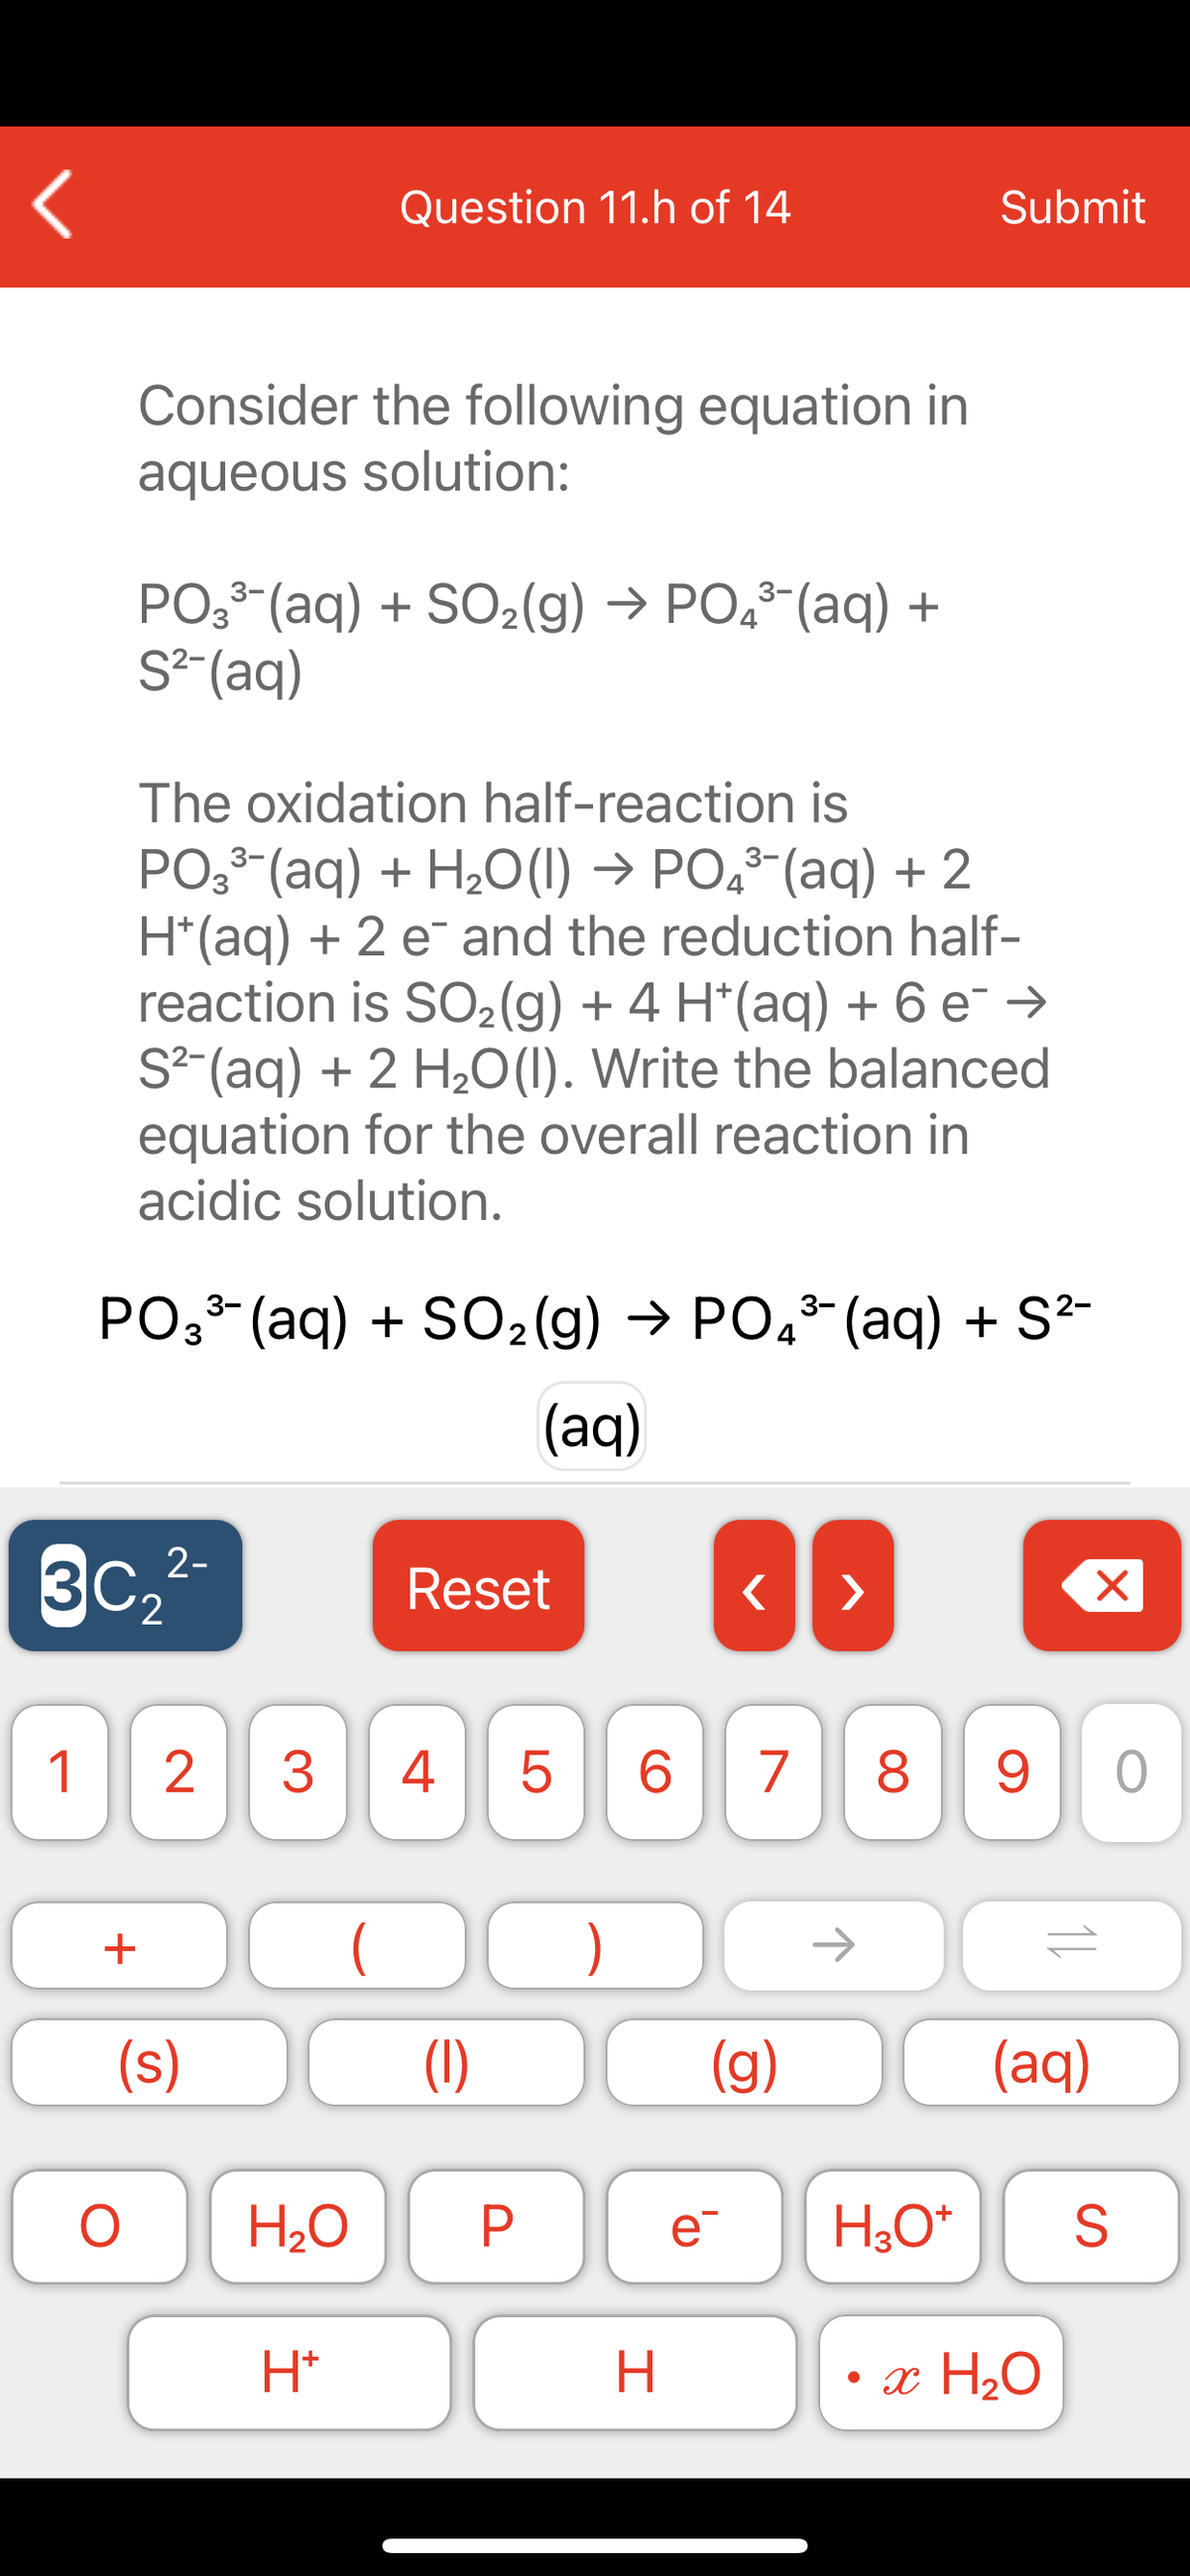 Question 11.h of 14
Submit
Consider the following equation in
aqueous solution:
PO (aq) + SO2(g) → PO,-(aq) +
S²-(aq)
The oxidation half-reaction is
PO3 (aq) + H2o(1) → PO,³-(aq) + 2
H*(aq) + 2 e¯ and the reduction half-
reaction is SO2(g) + 4 H*(aq) + 6 e¯ →
S² (aq) + 2 H2O(1). Write the balanced
equation for the overall reaction in
acidic solution.
PO33- (aq) + SO2(g) → PO,3- (aq) + S²-
(aq)
3c,2
2-
3C2
Reset
>
1
3
4
8
+
)
->
(s)
(1)
(g)
(aq)
H2O
e
H;0*
H*
• x H2O
LO
